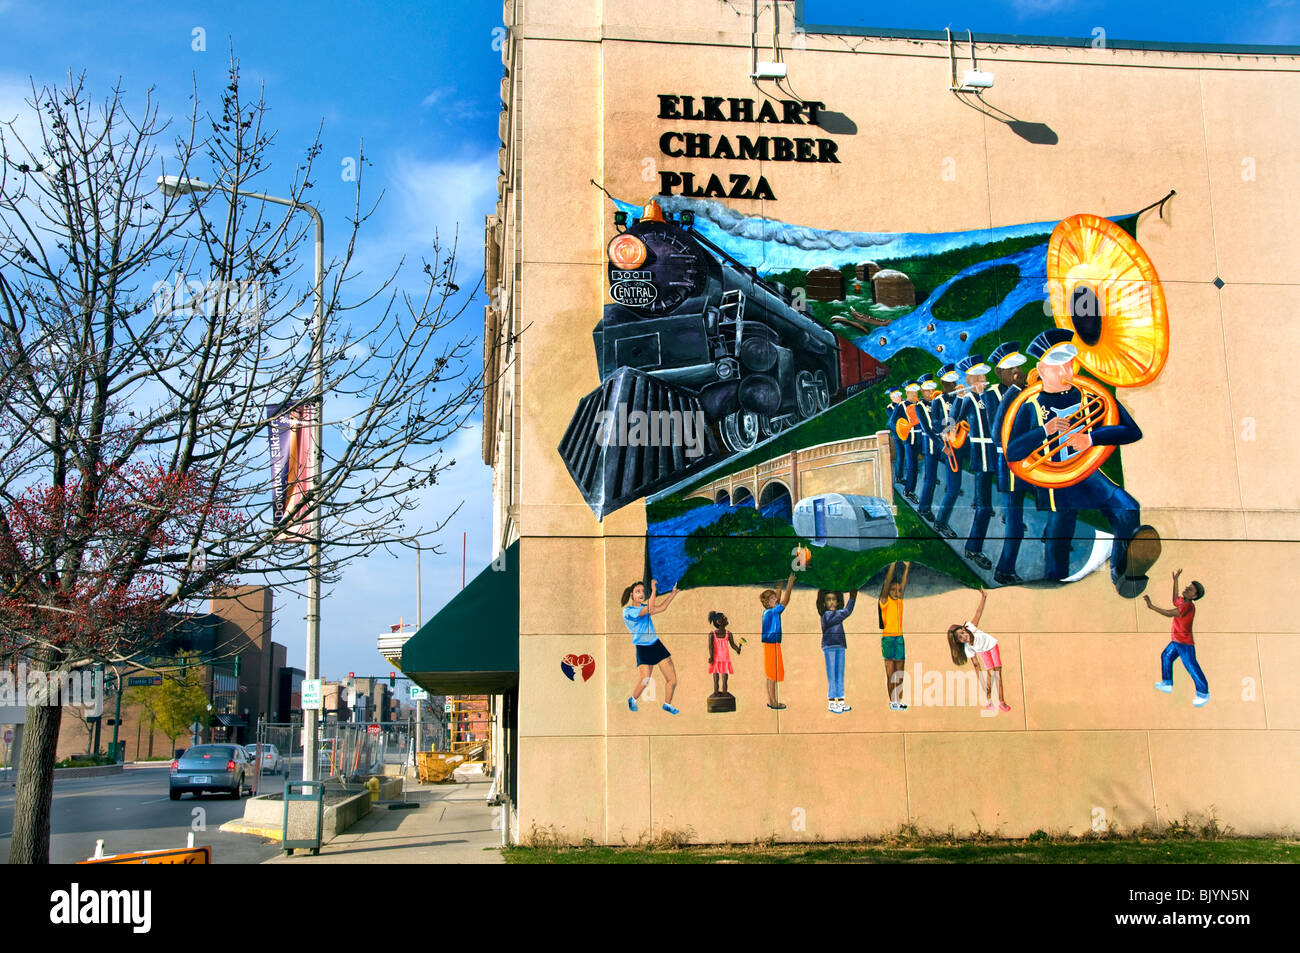 Mural in downtown Elkhart Indiana Stock Photo